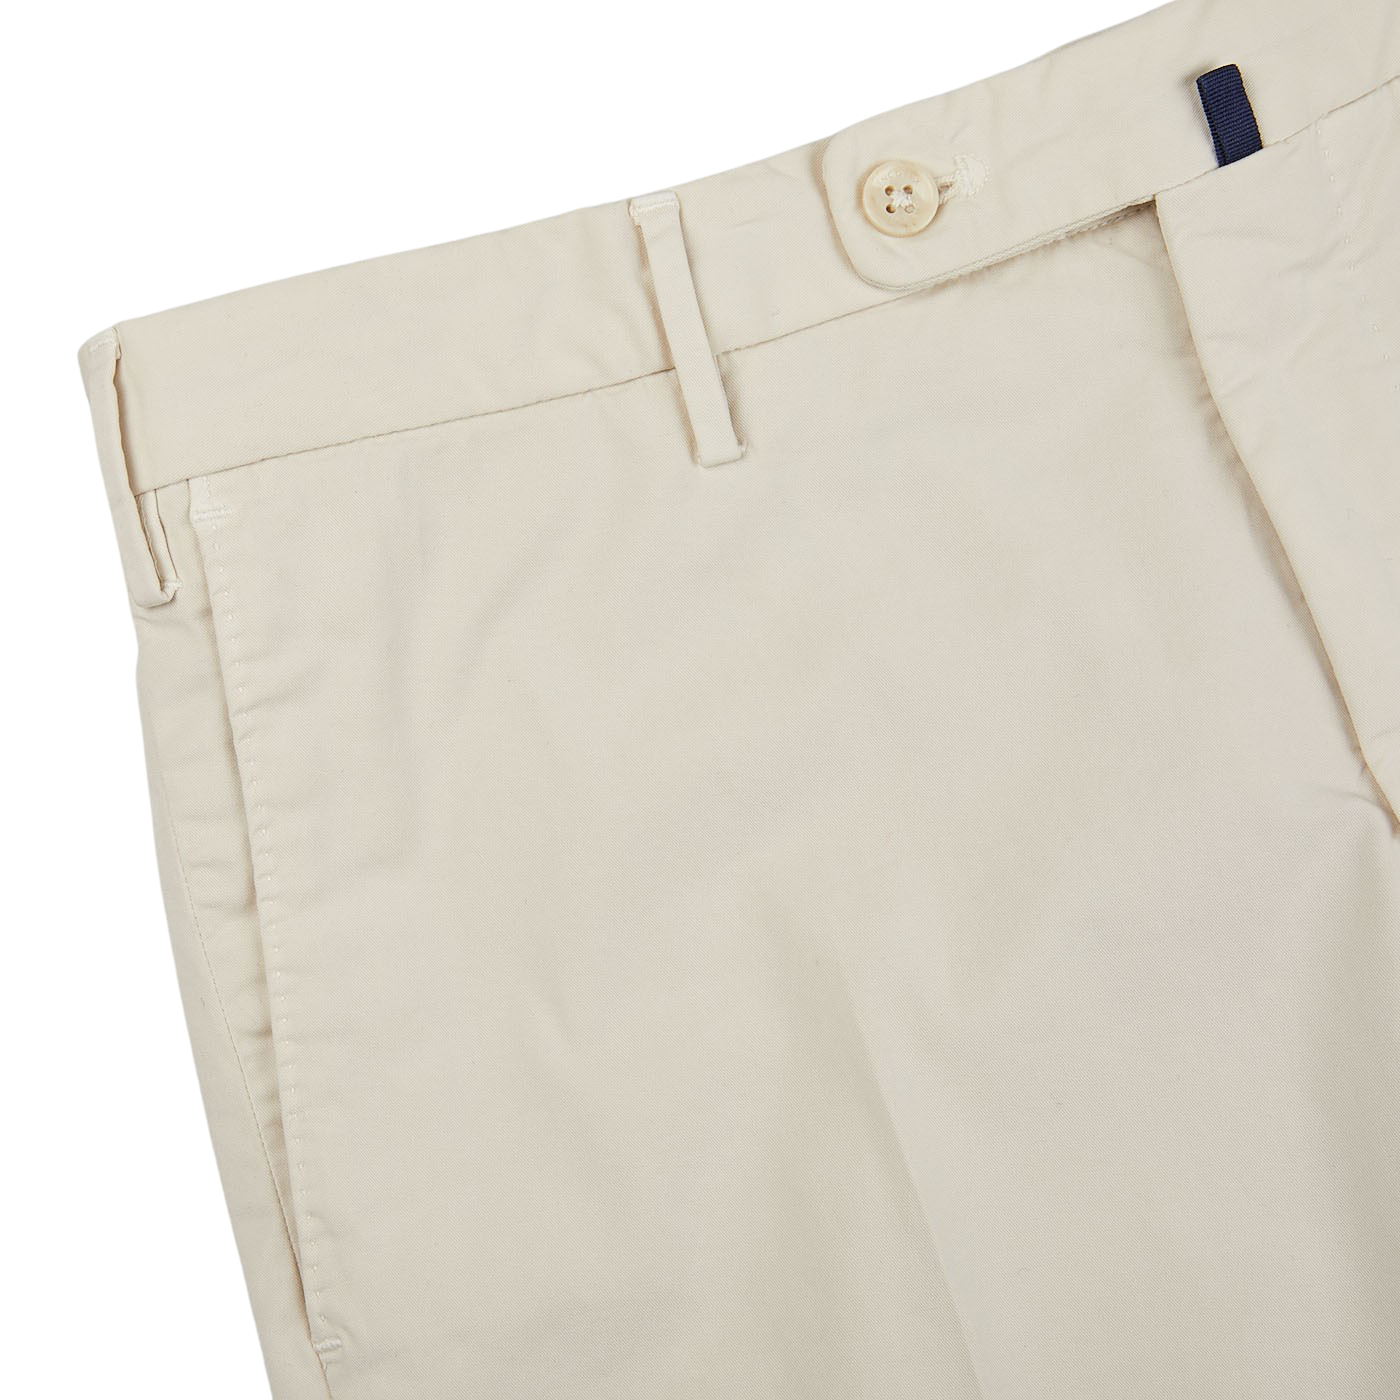 A close up of a pair of Incotex Light Beige Cotton Stretch Regular Chinos, made from cotton with stretch for a comfortable fit.